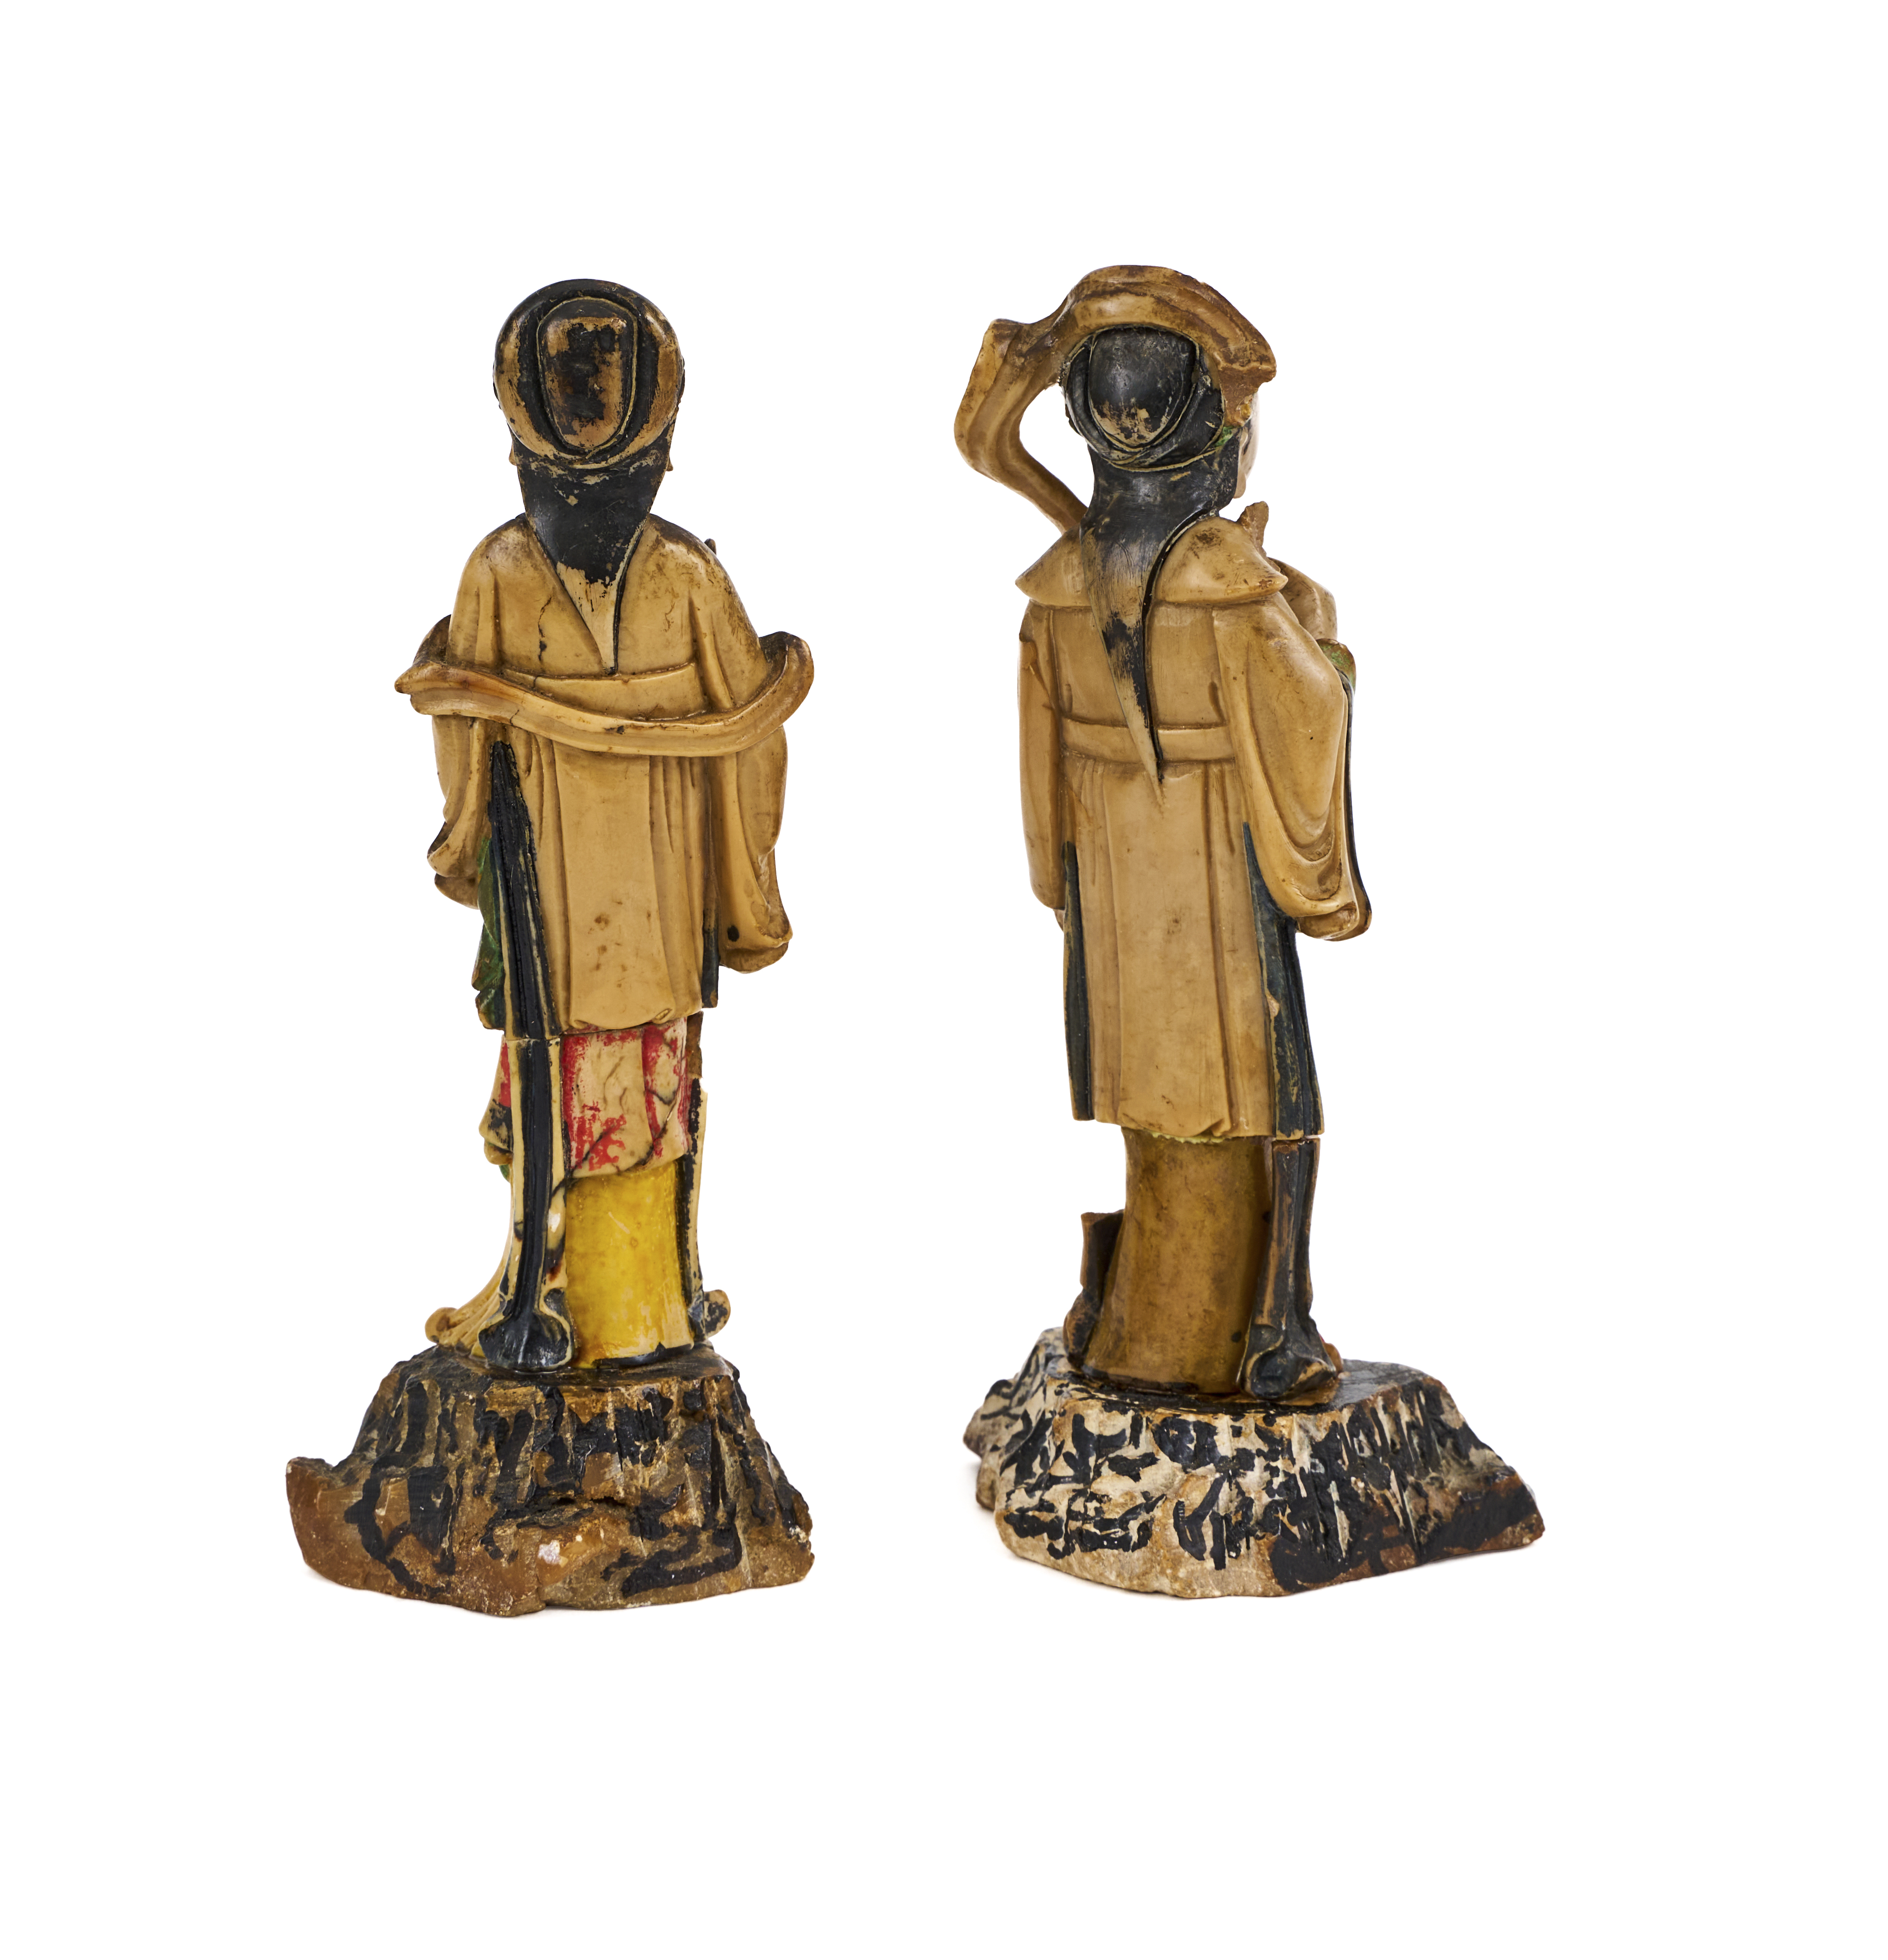 TWO CHINESE POLYCHROME PAINTED SOAPSTONE FIGURES, QING DYNASTY (1644-1911) - Image 2 of 3